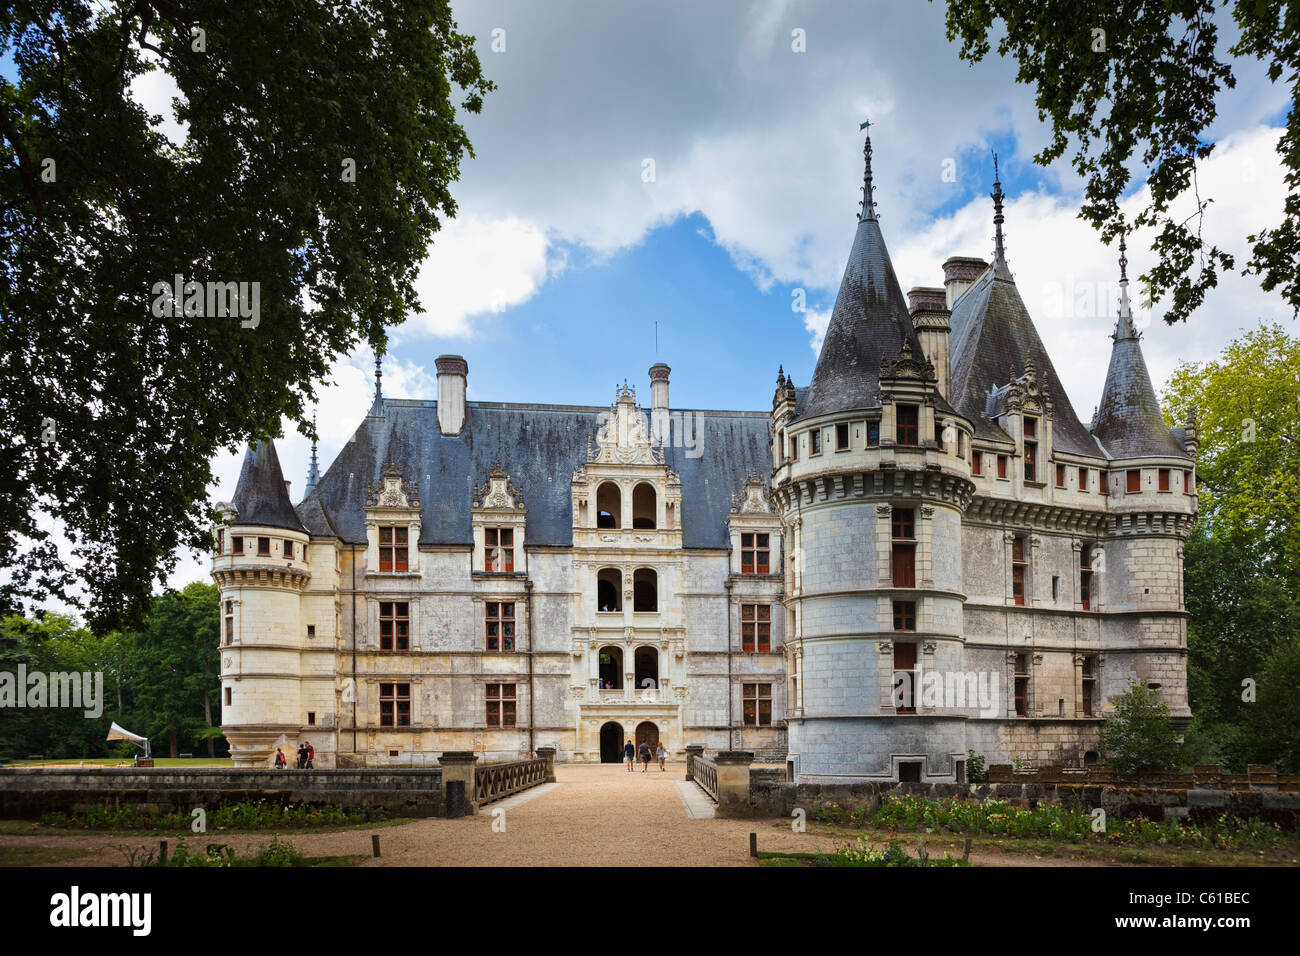 Typical French chateau, Loire Chateau at Azay-le-Rideau, Indre et Loire, Loire Valley, France, Europe Stock Photo